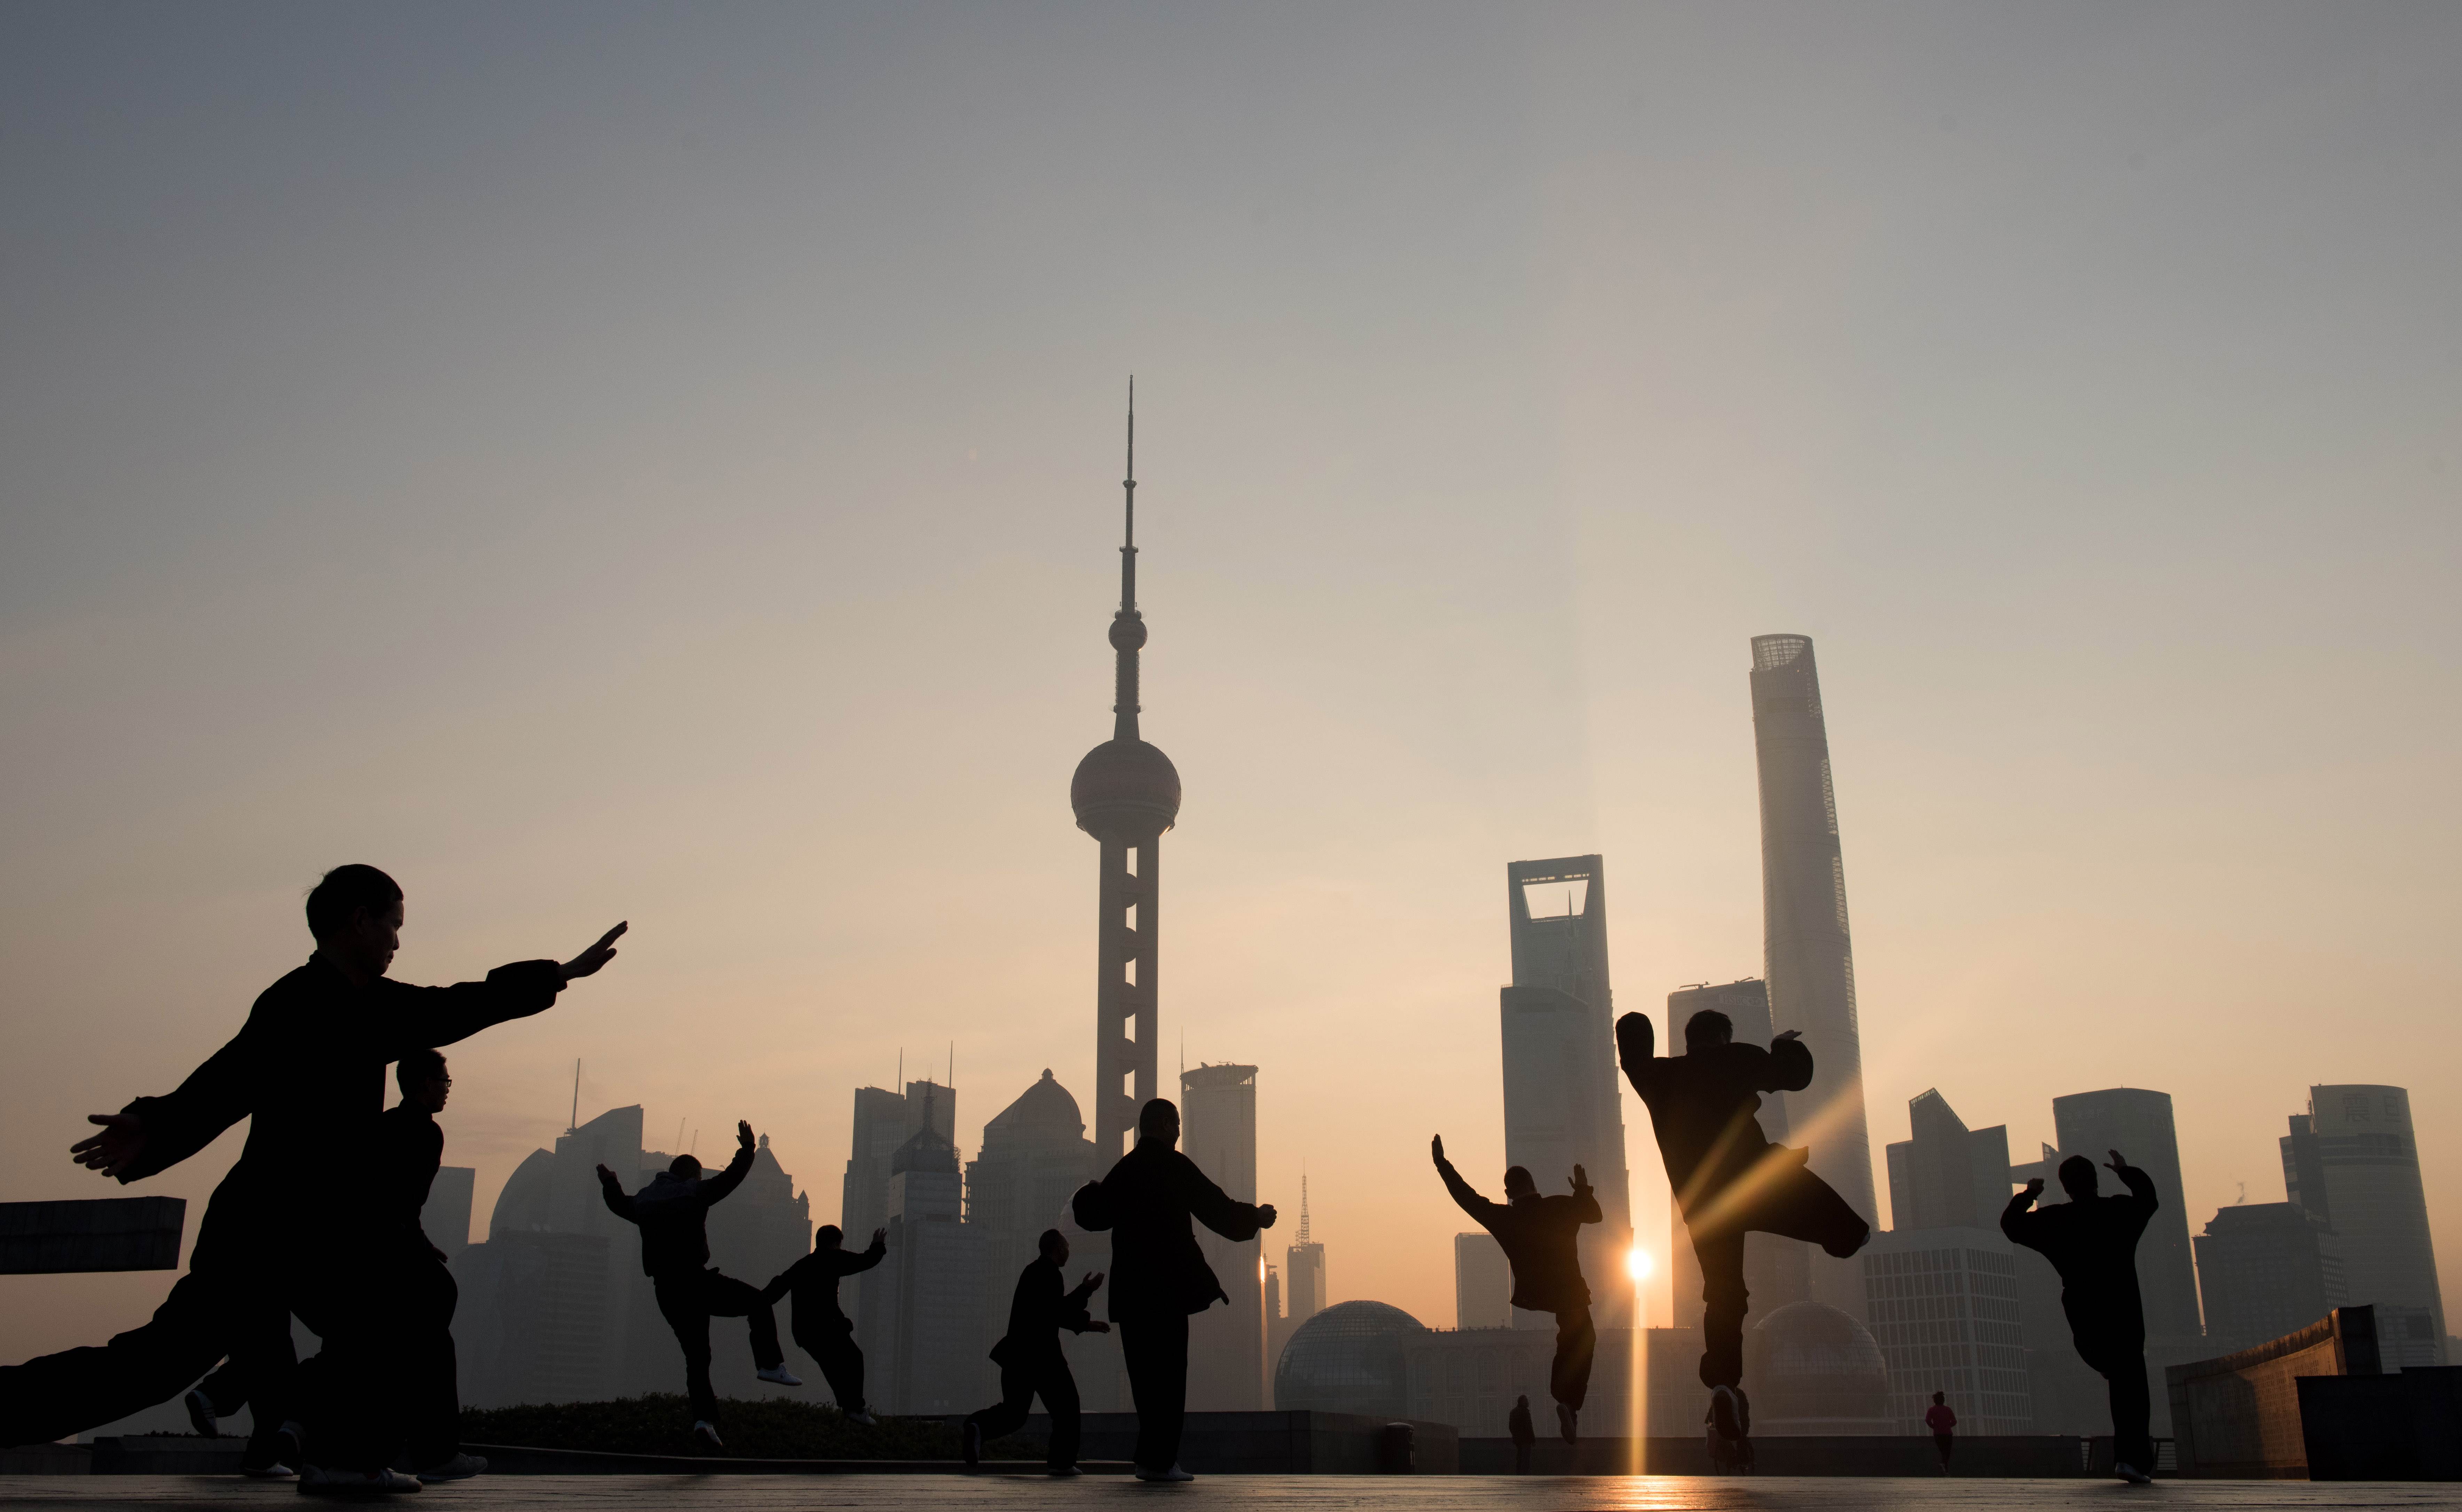 Men do their morning exercises in front of the skyline of the Lujiazui Financial District in Pudong in Shanghai on December 1, 2015. AFP PHOTO / JOHANNES EISELE